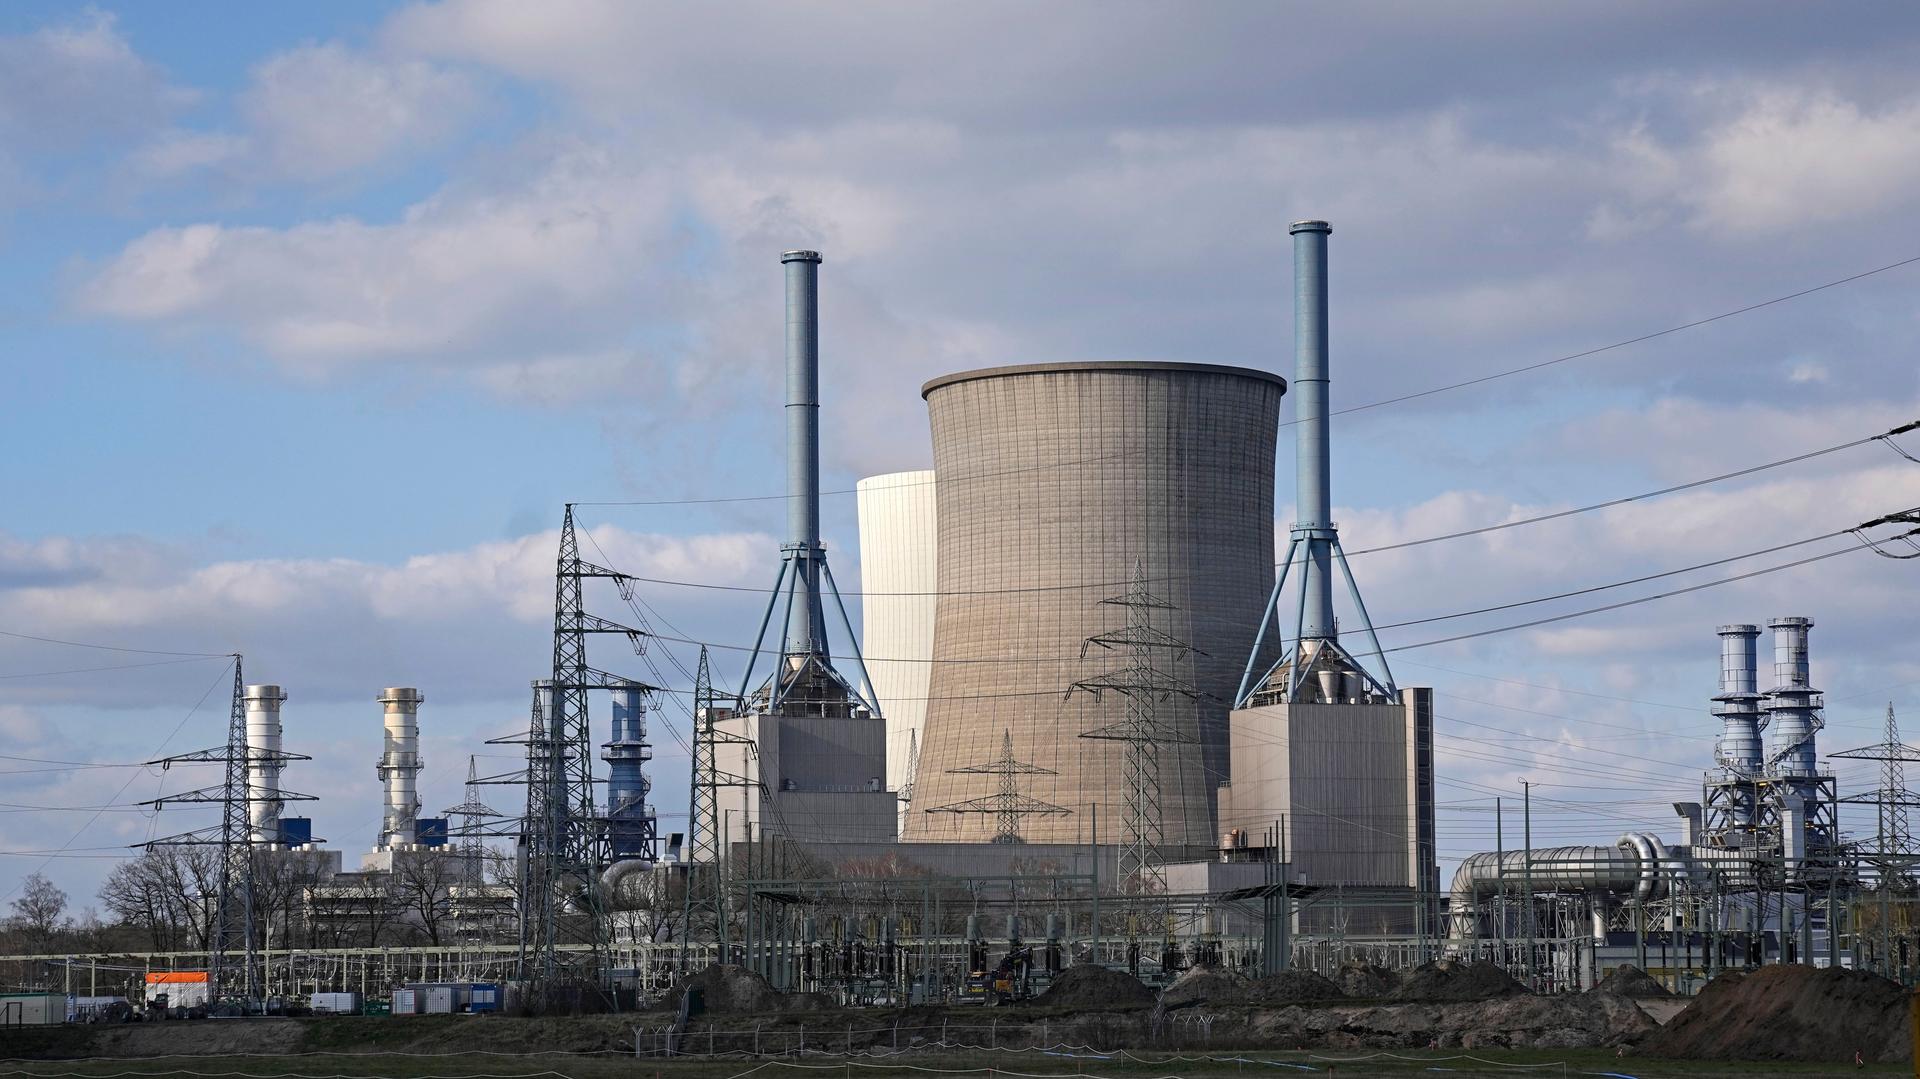 A natural gas power plant of RWE AG in Lingen, Germany